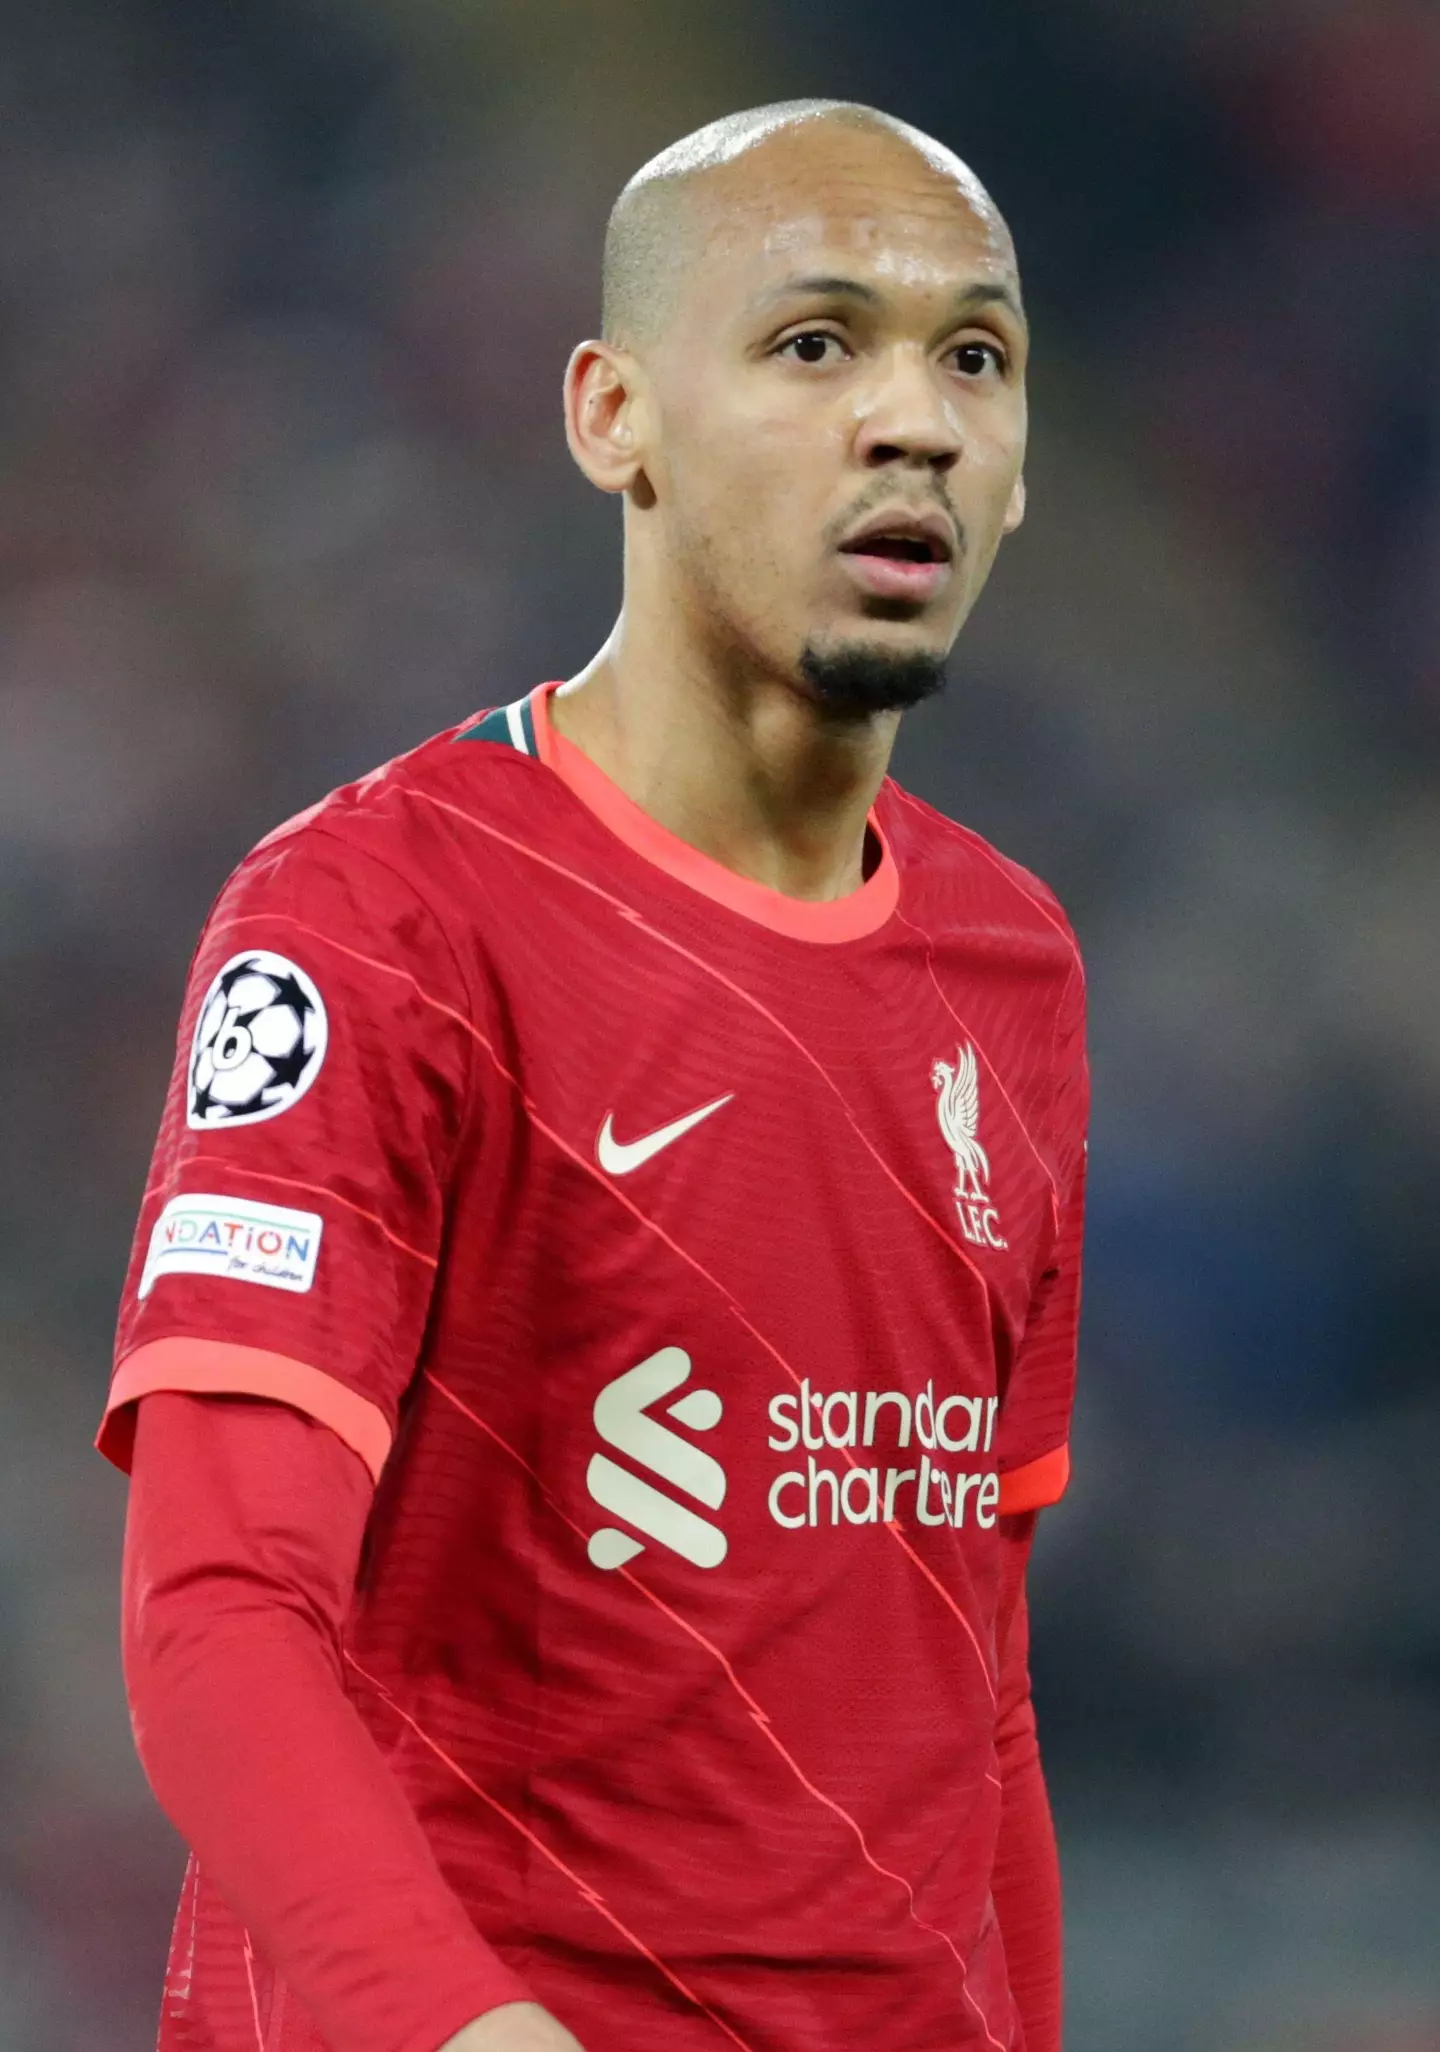 Liverpool's Fabinho is one of four Premier League players on the list (Image: PA)